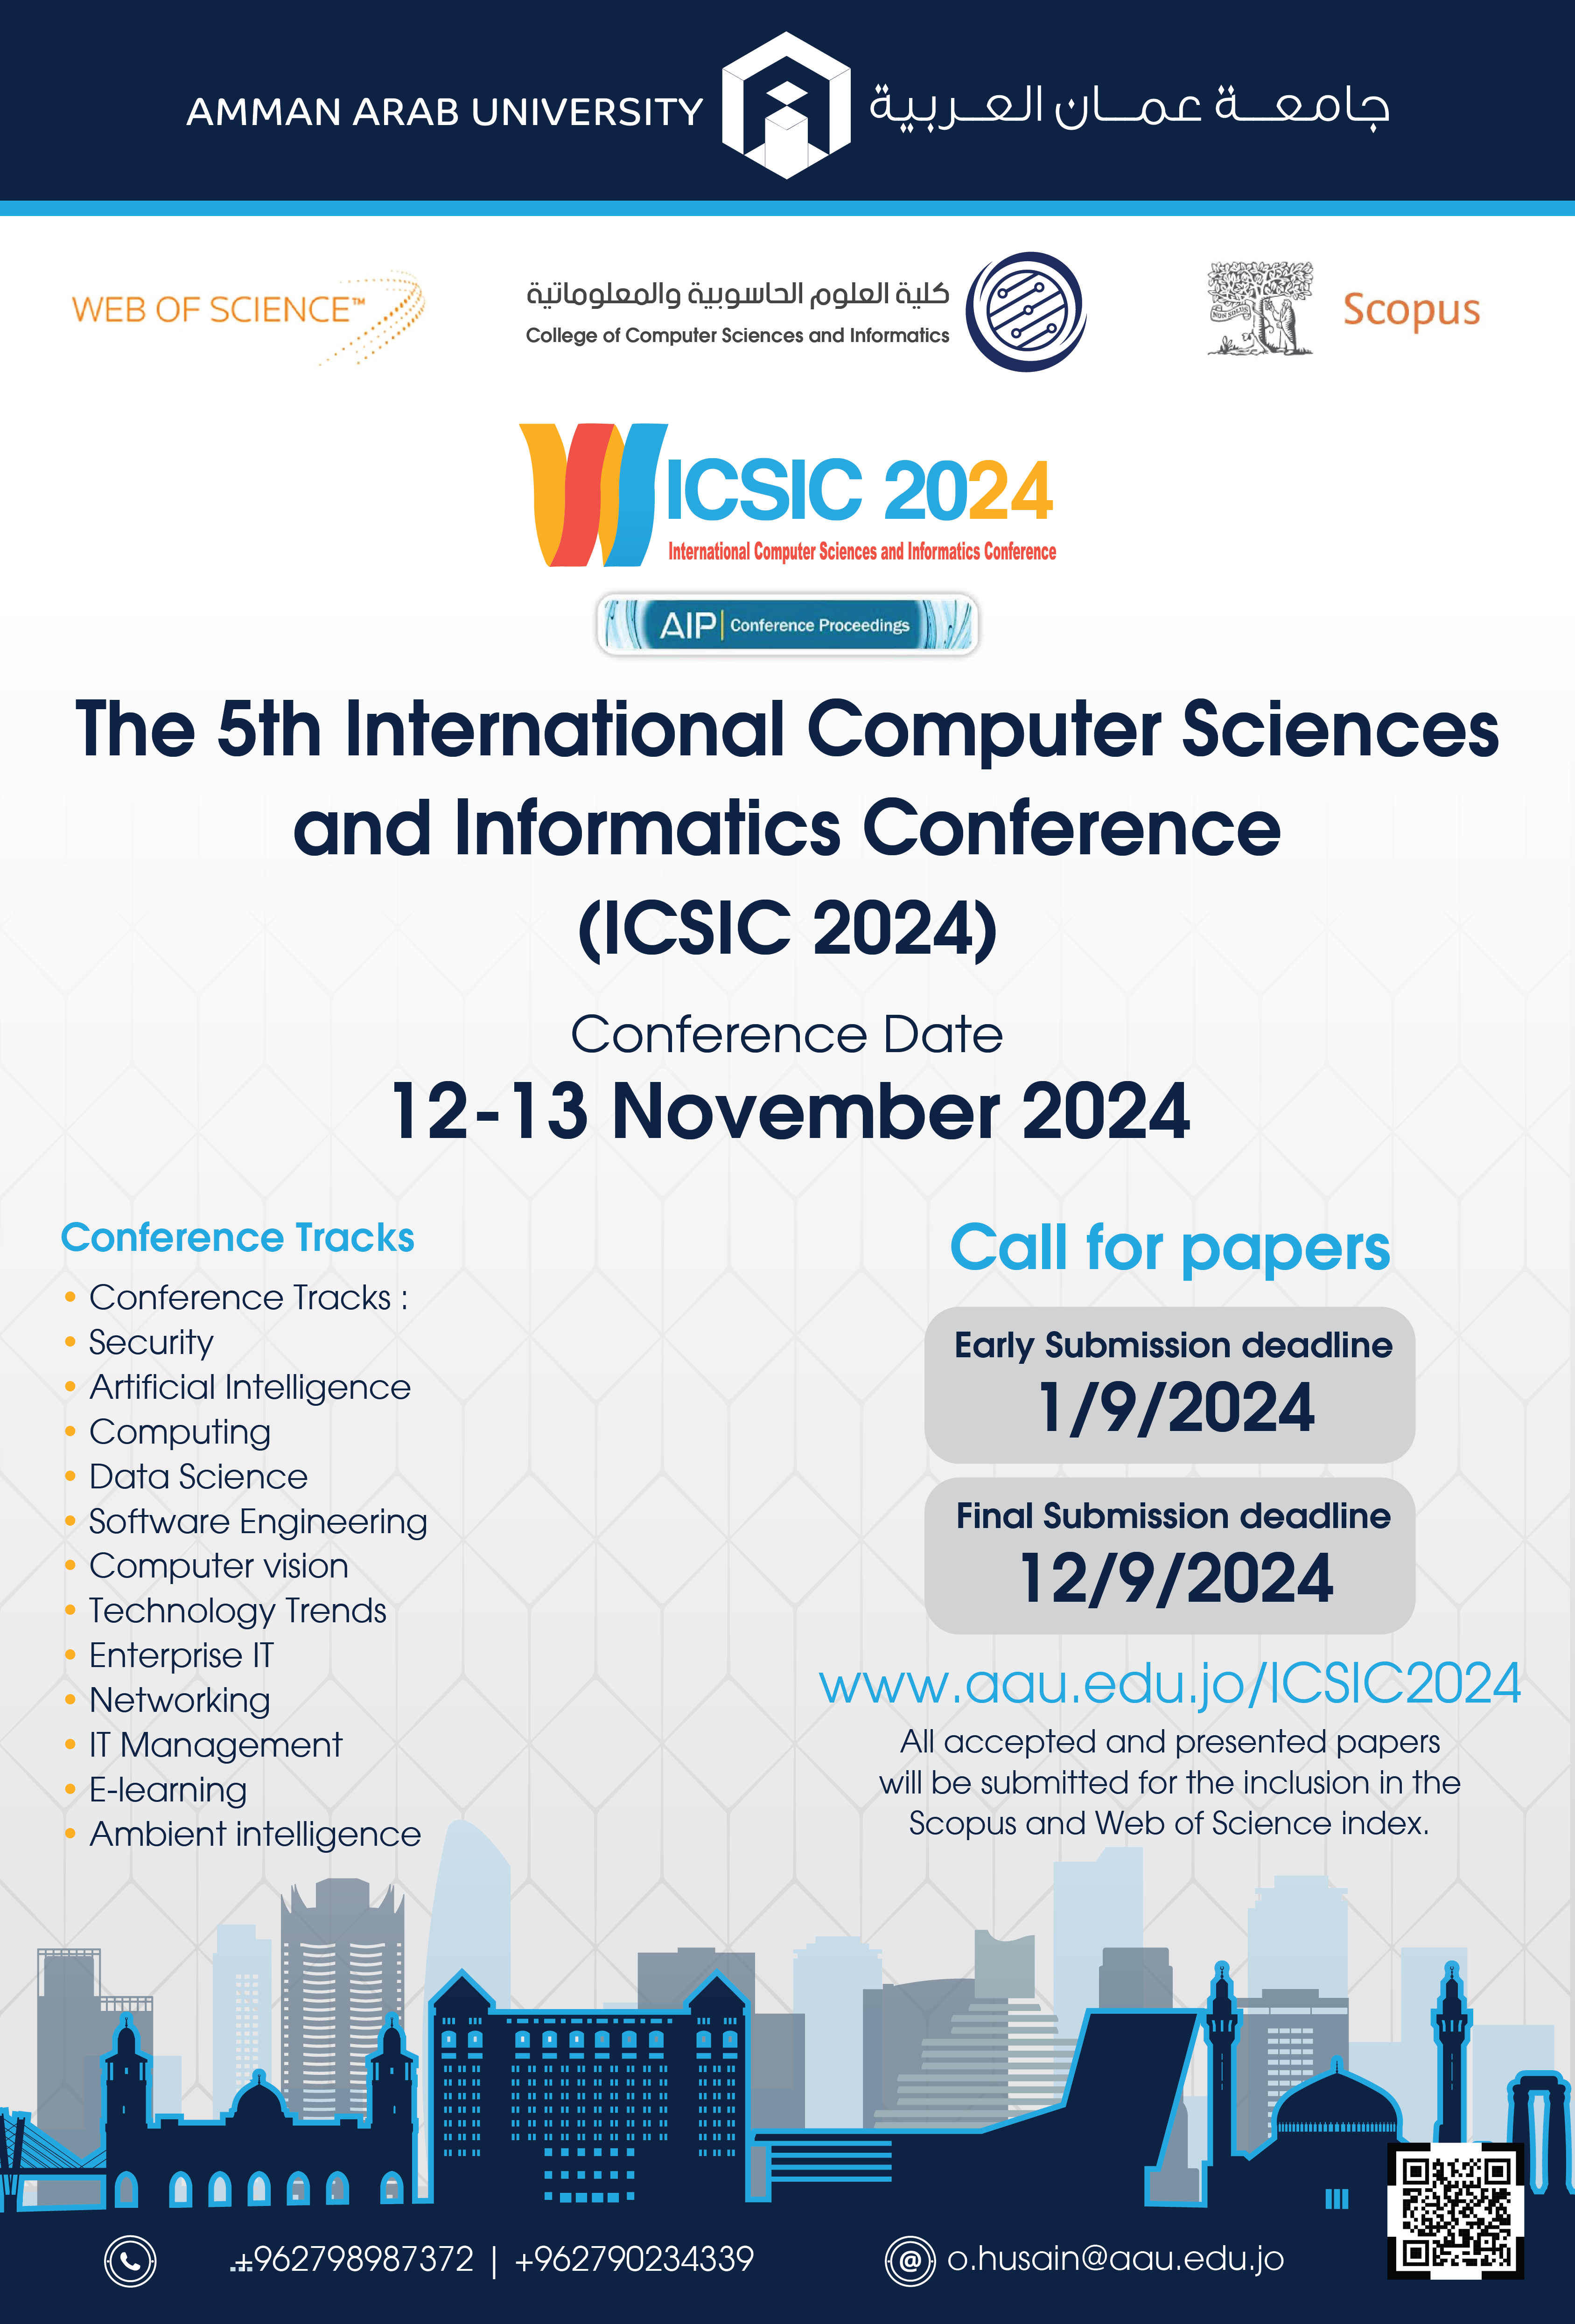 The 5th International Computer Sciences and Informatics Conference